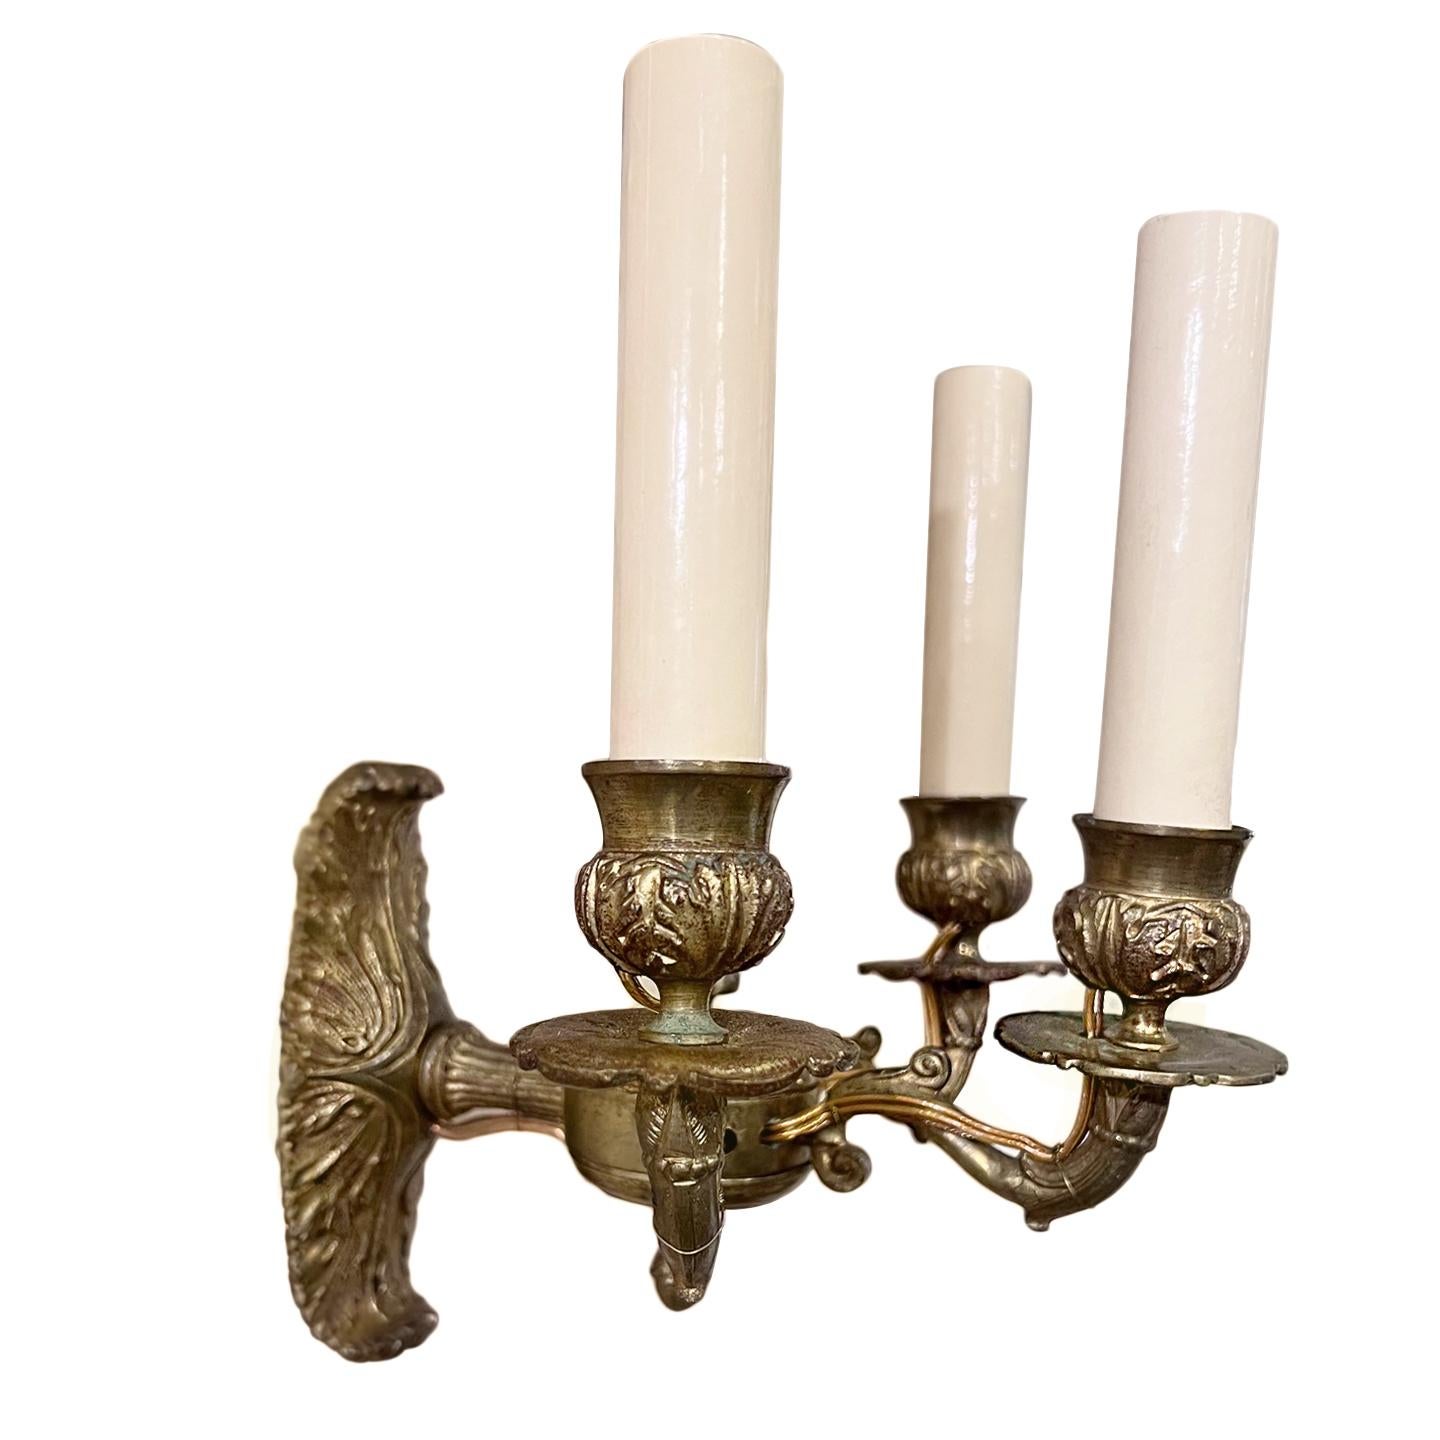 Pair of 19th century French empire style 3 light sconces with original finish. 

Measurements:
Height: 9.5